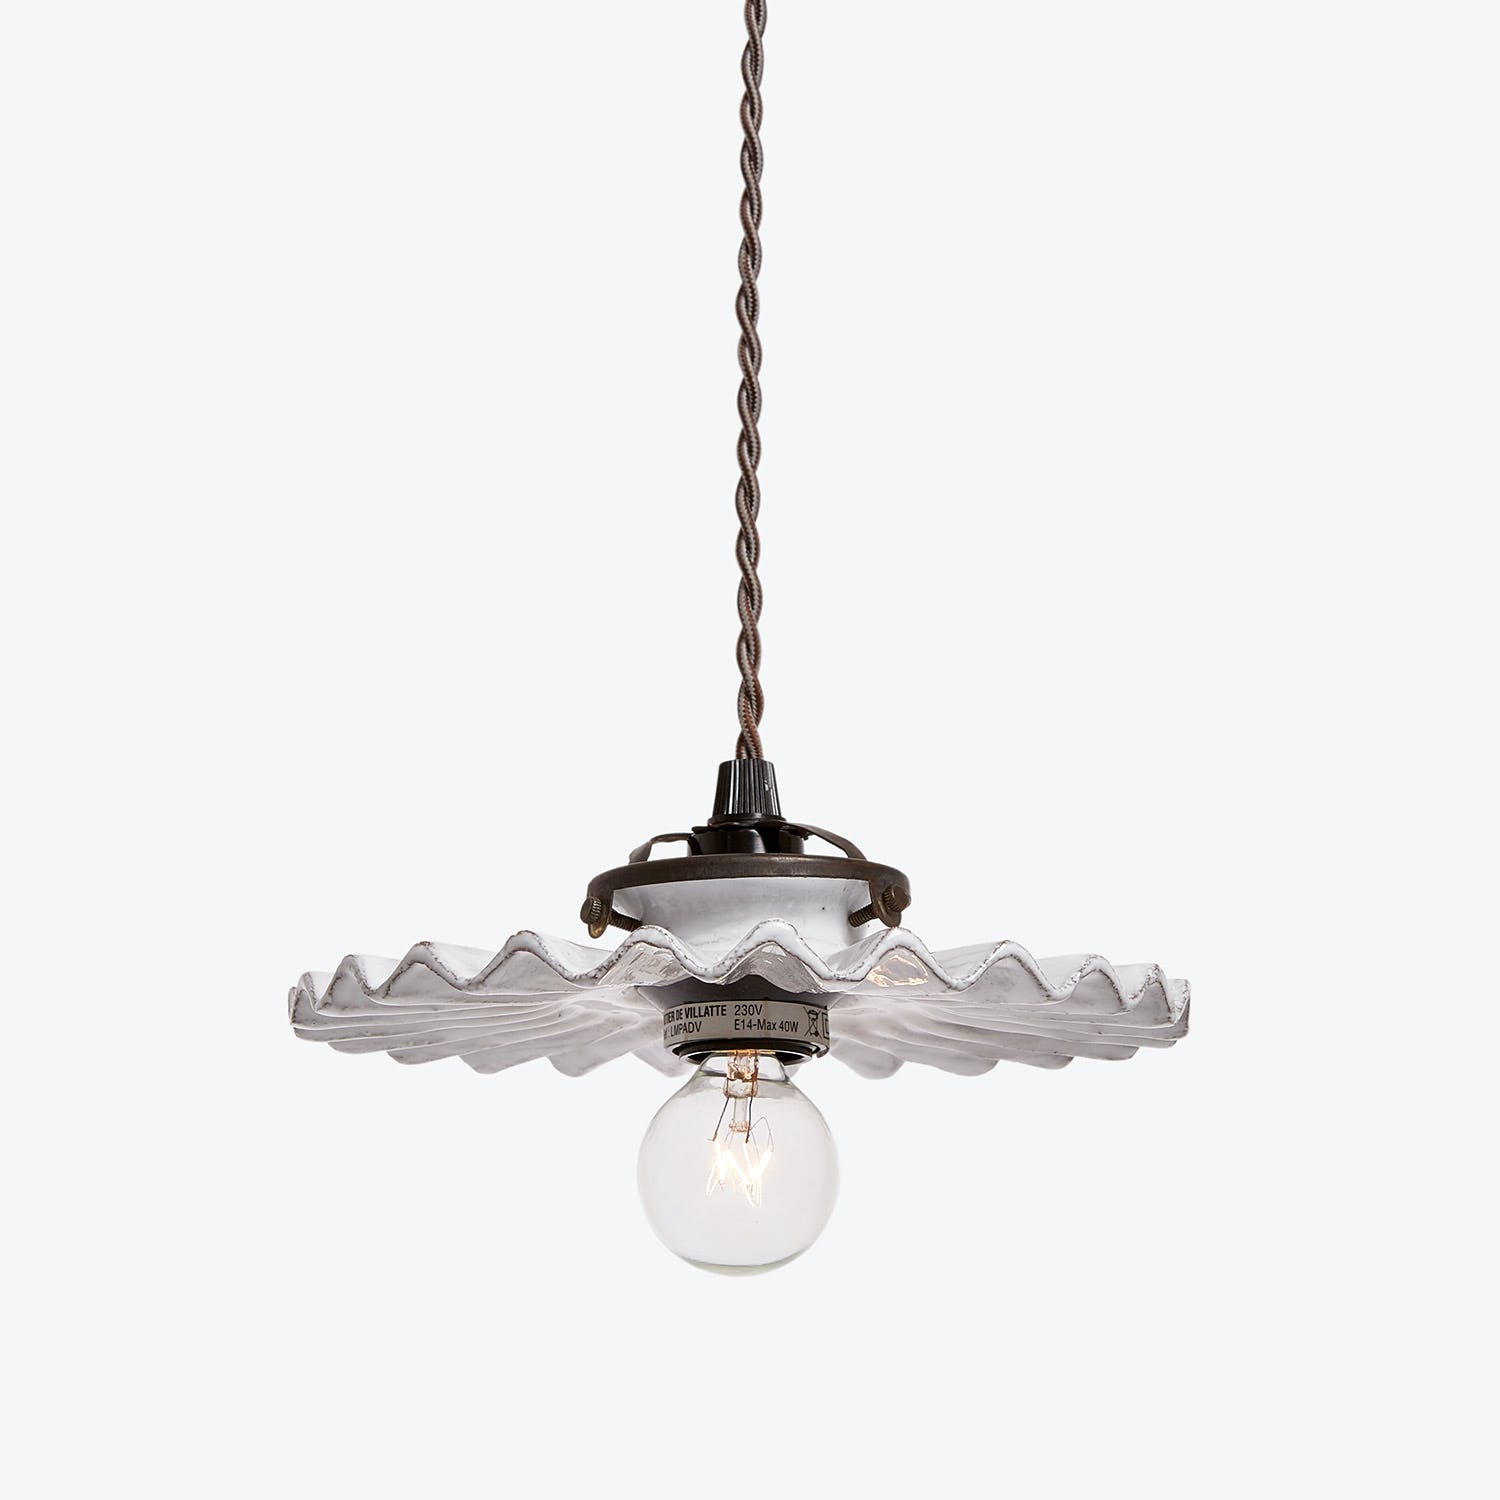 Elegant pendant light fixture with vintage-inspired glass shade and warm glow.